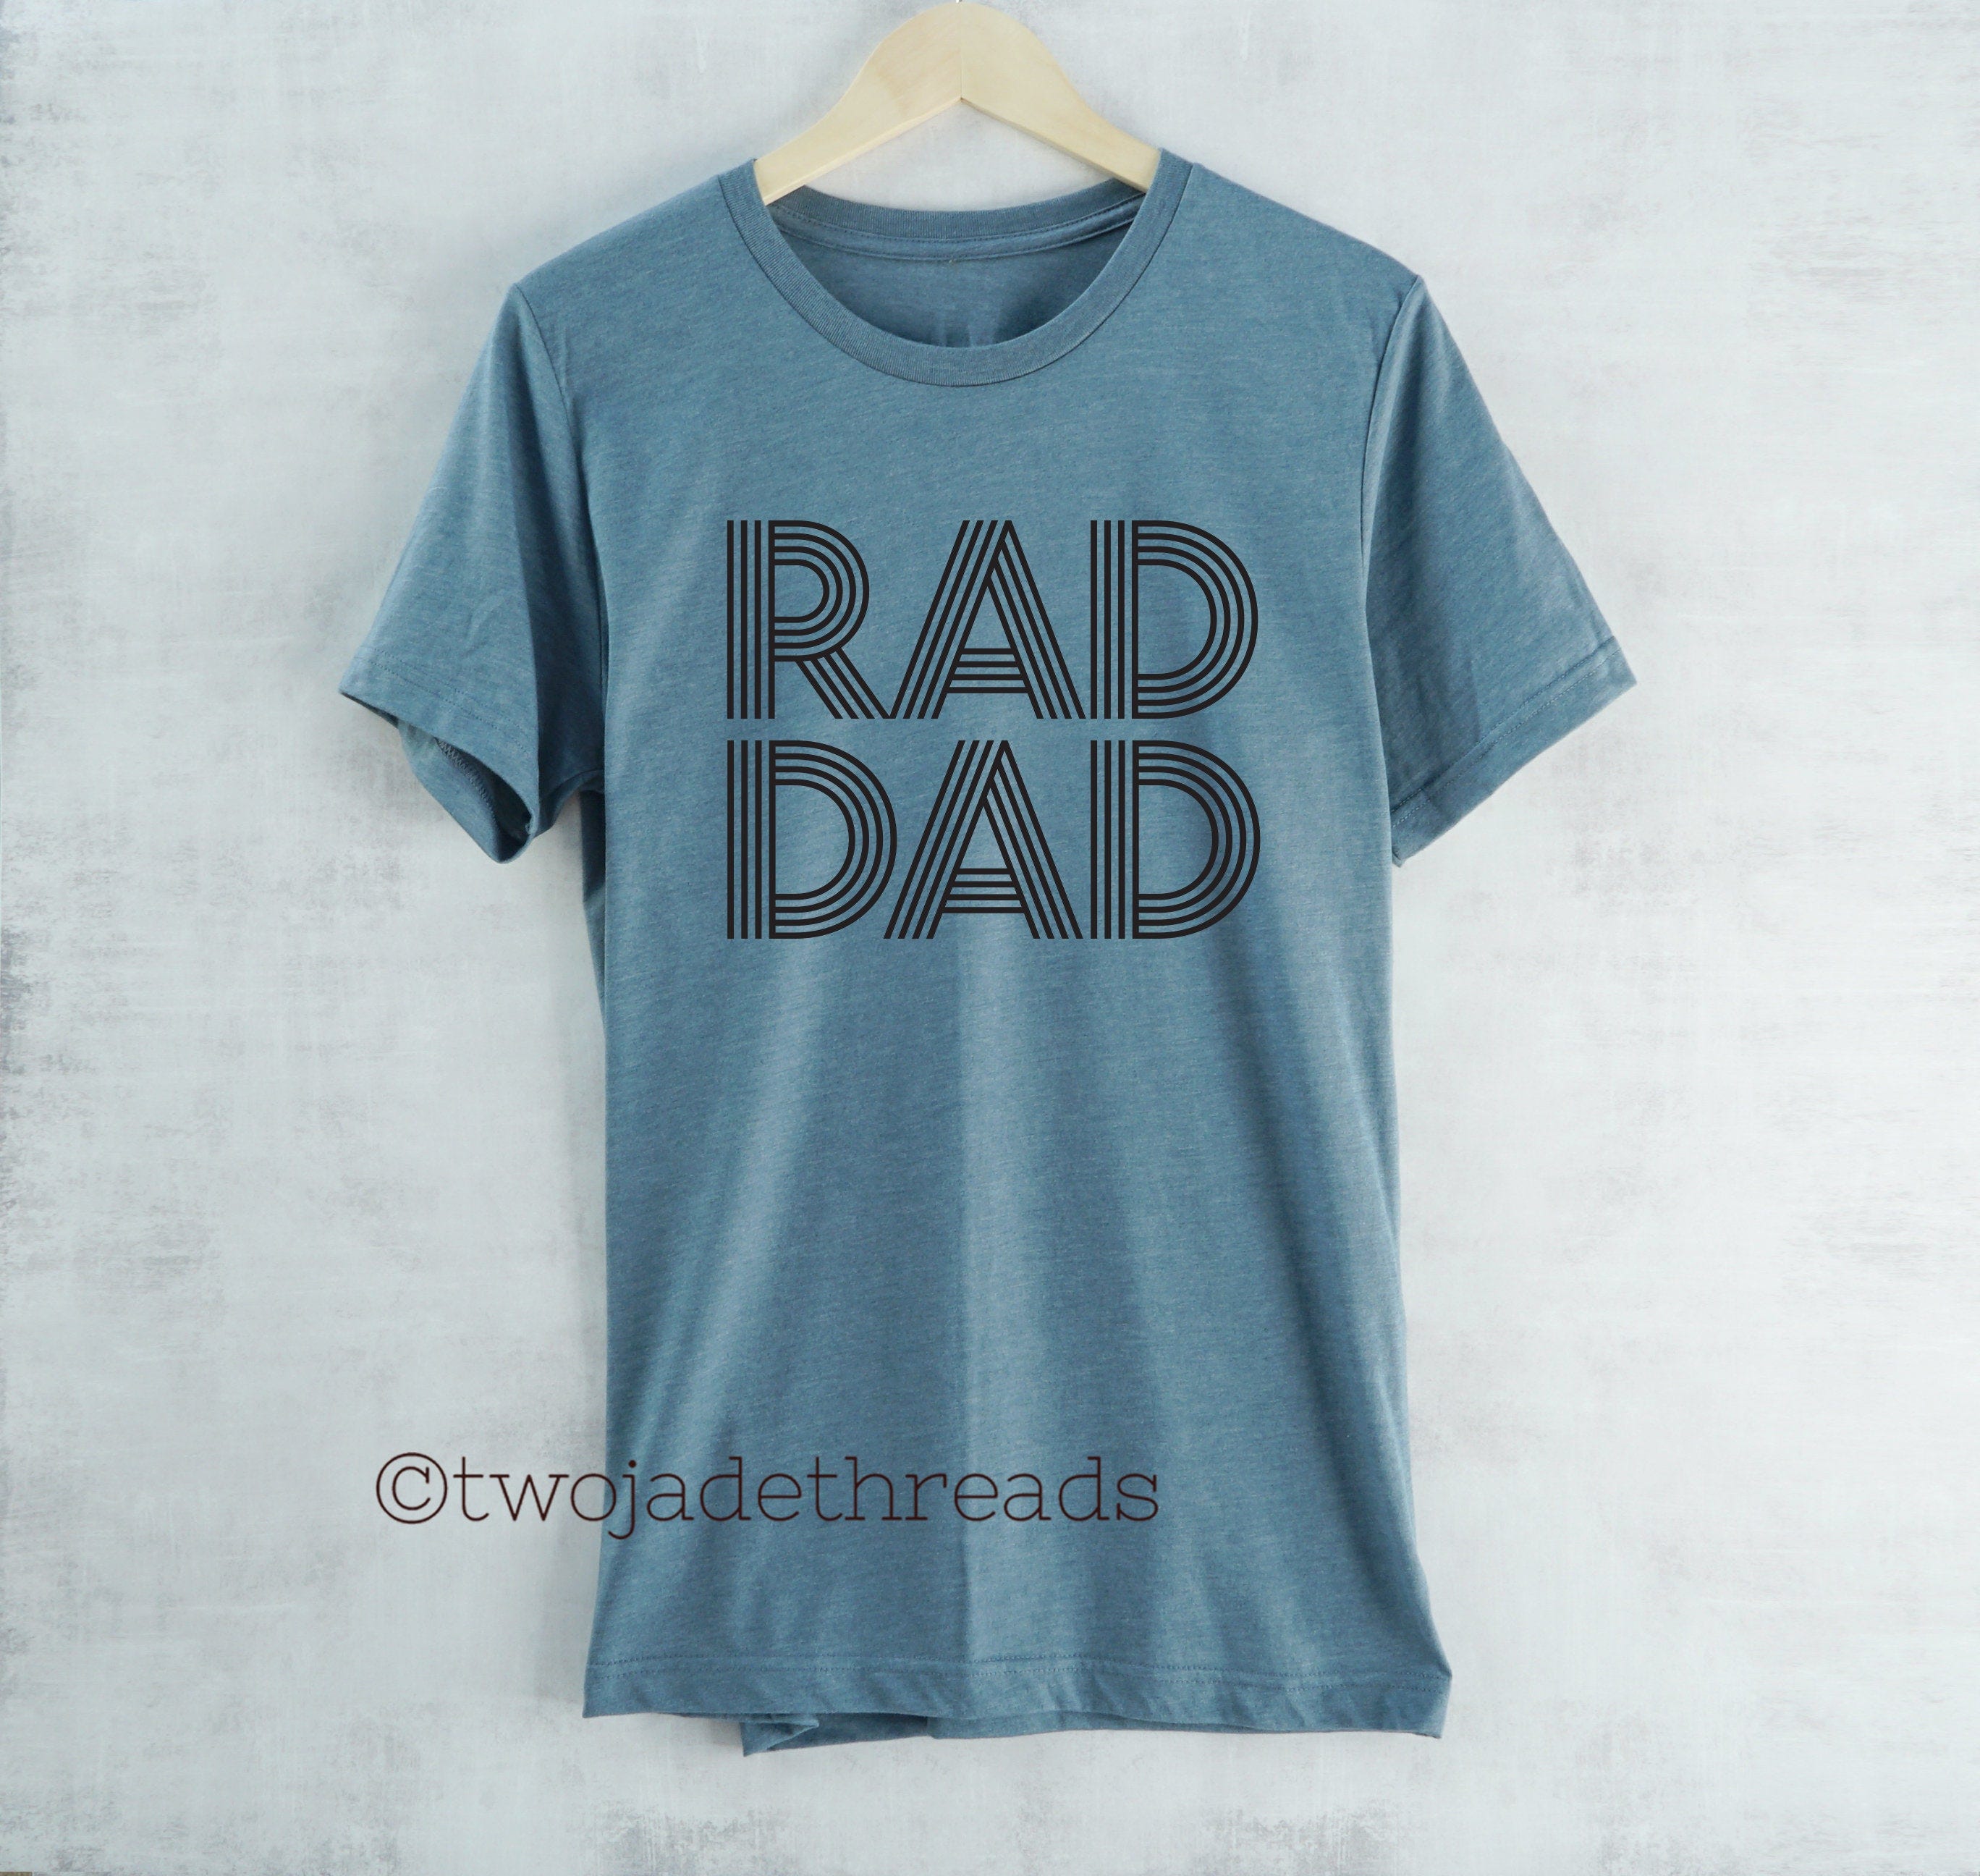 Fathers day pregnancy announcement shirt, rad dad shirt, new dad shirt, dad pregnancy announcement t shirt, dad to be shirt, dad to be gift